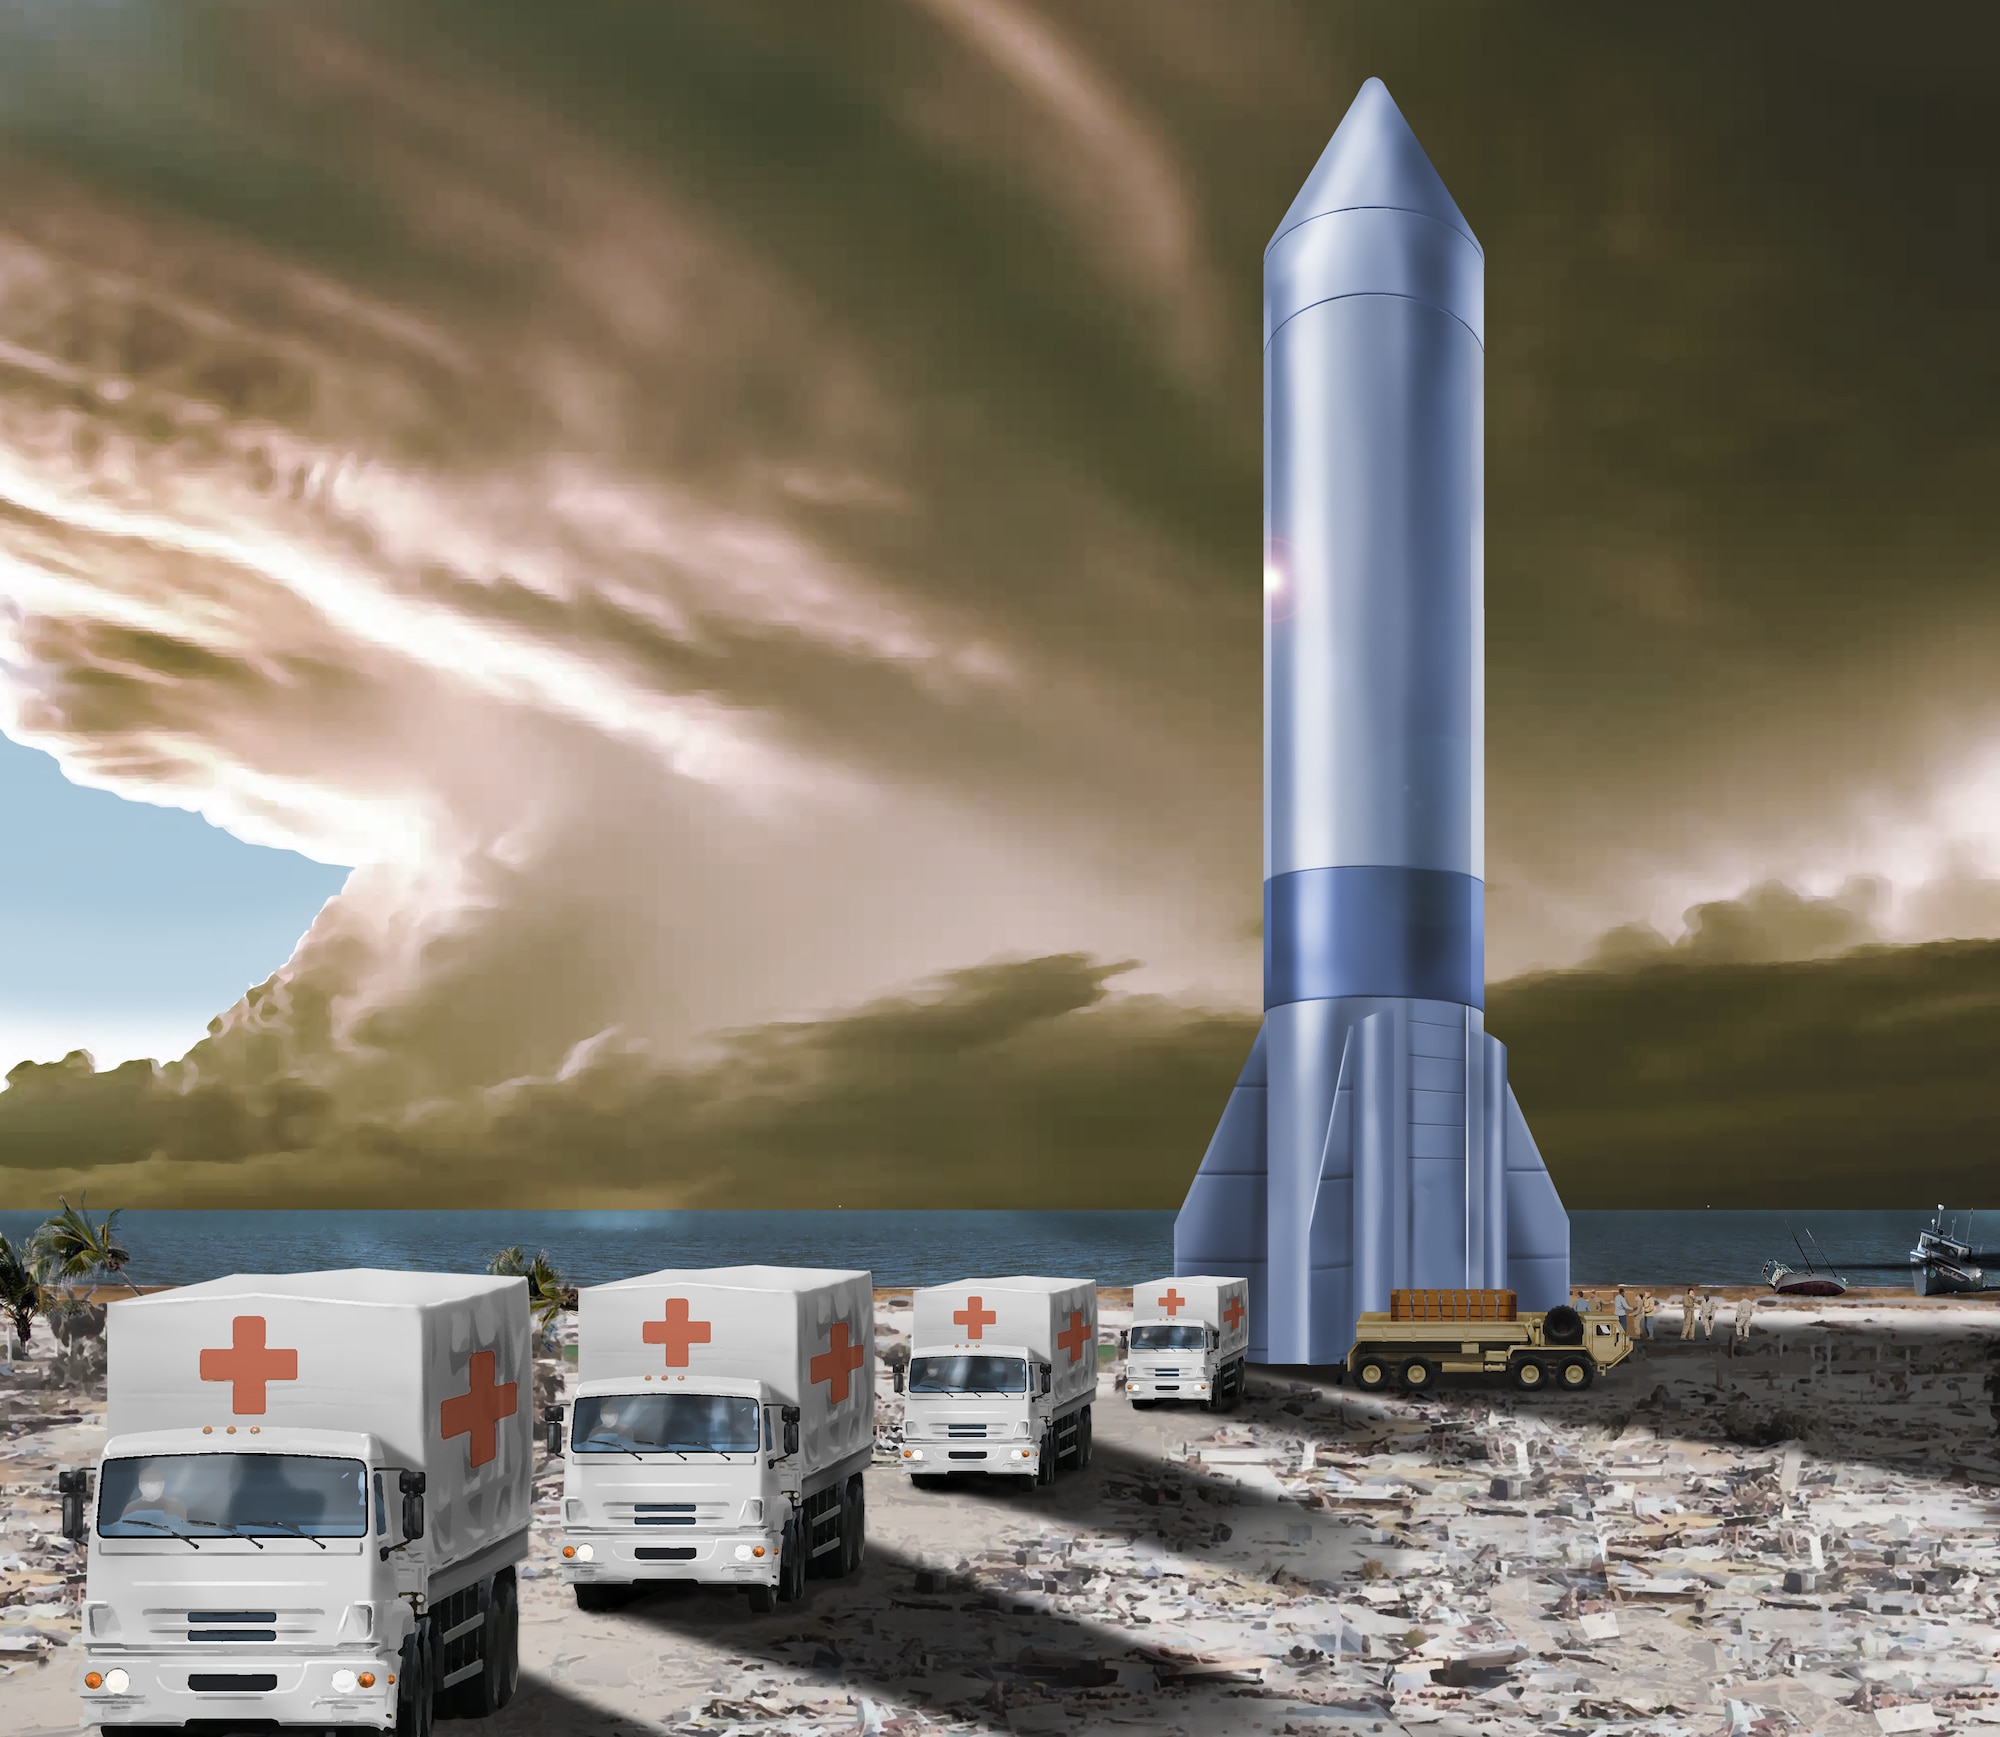 The Department of the Air Force announced June 4, 2021, the designation of Rocket Cargo as the fourth Vanguard program as part of its transformational science and technology portfolio identified in the DAF 2030 Science and Technology strategy for the next decade. (U.S. Air Force illustration)